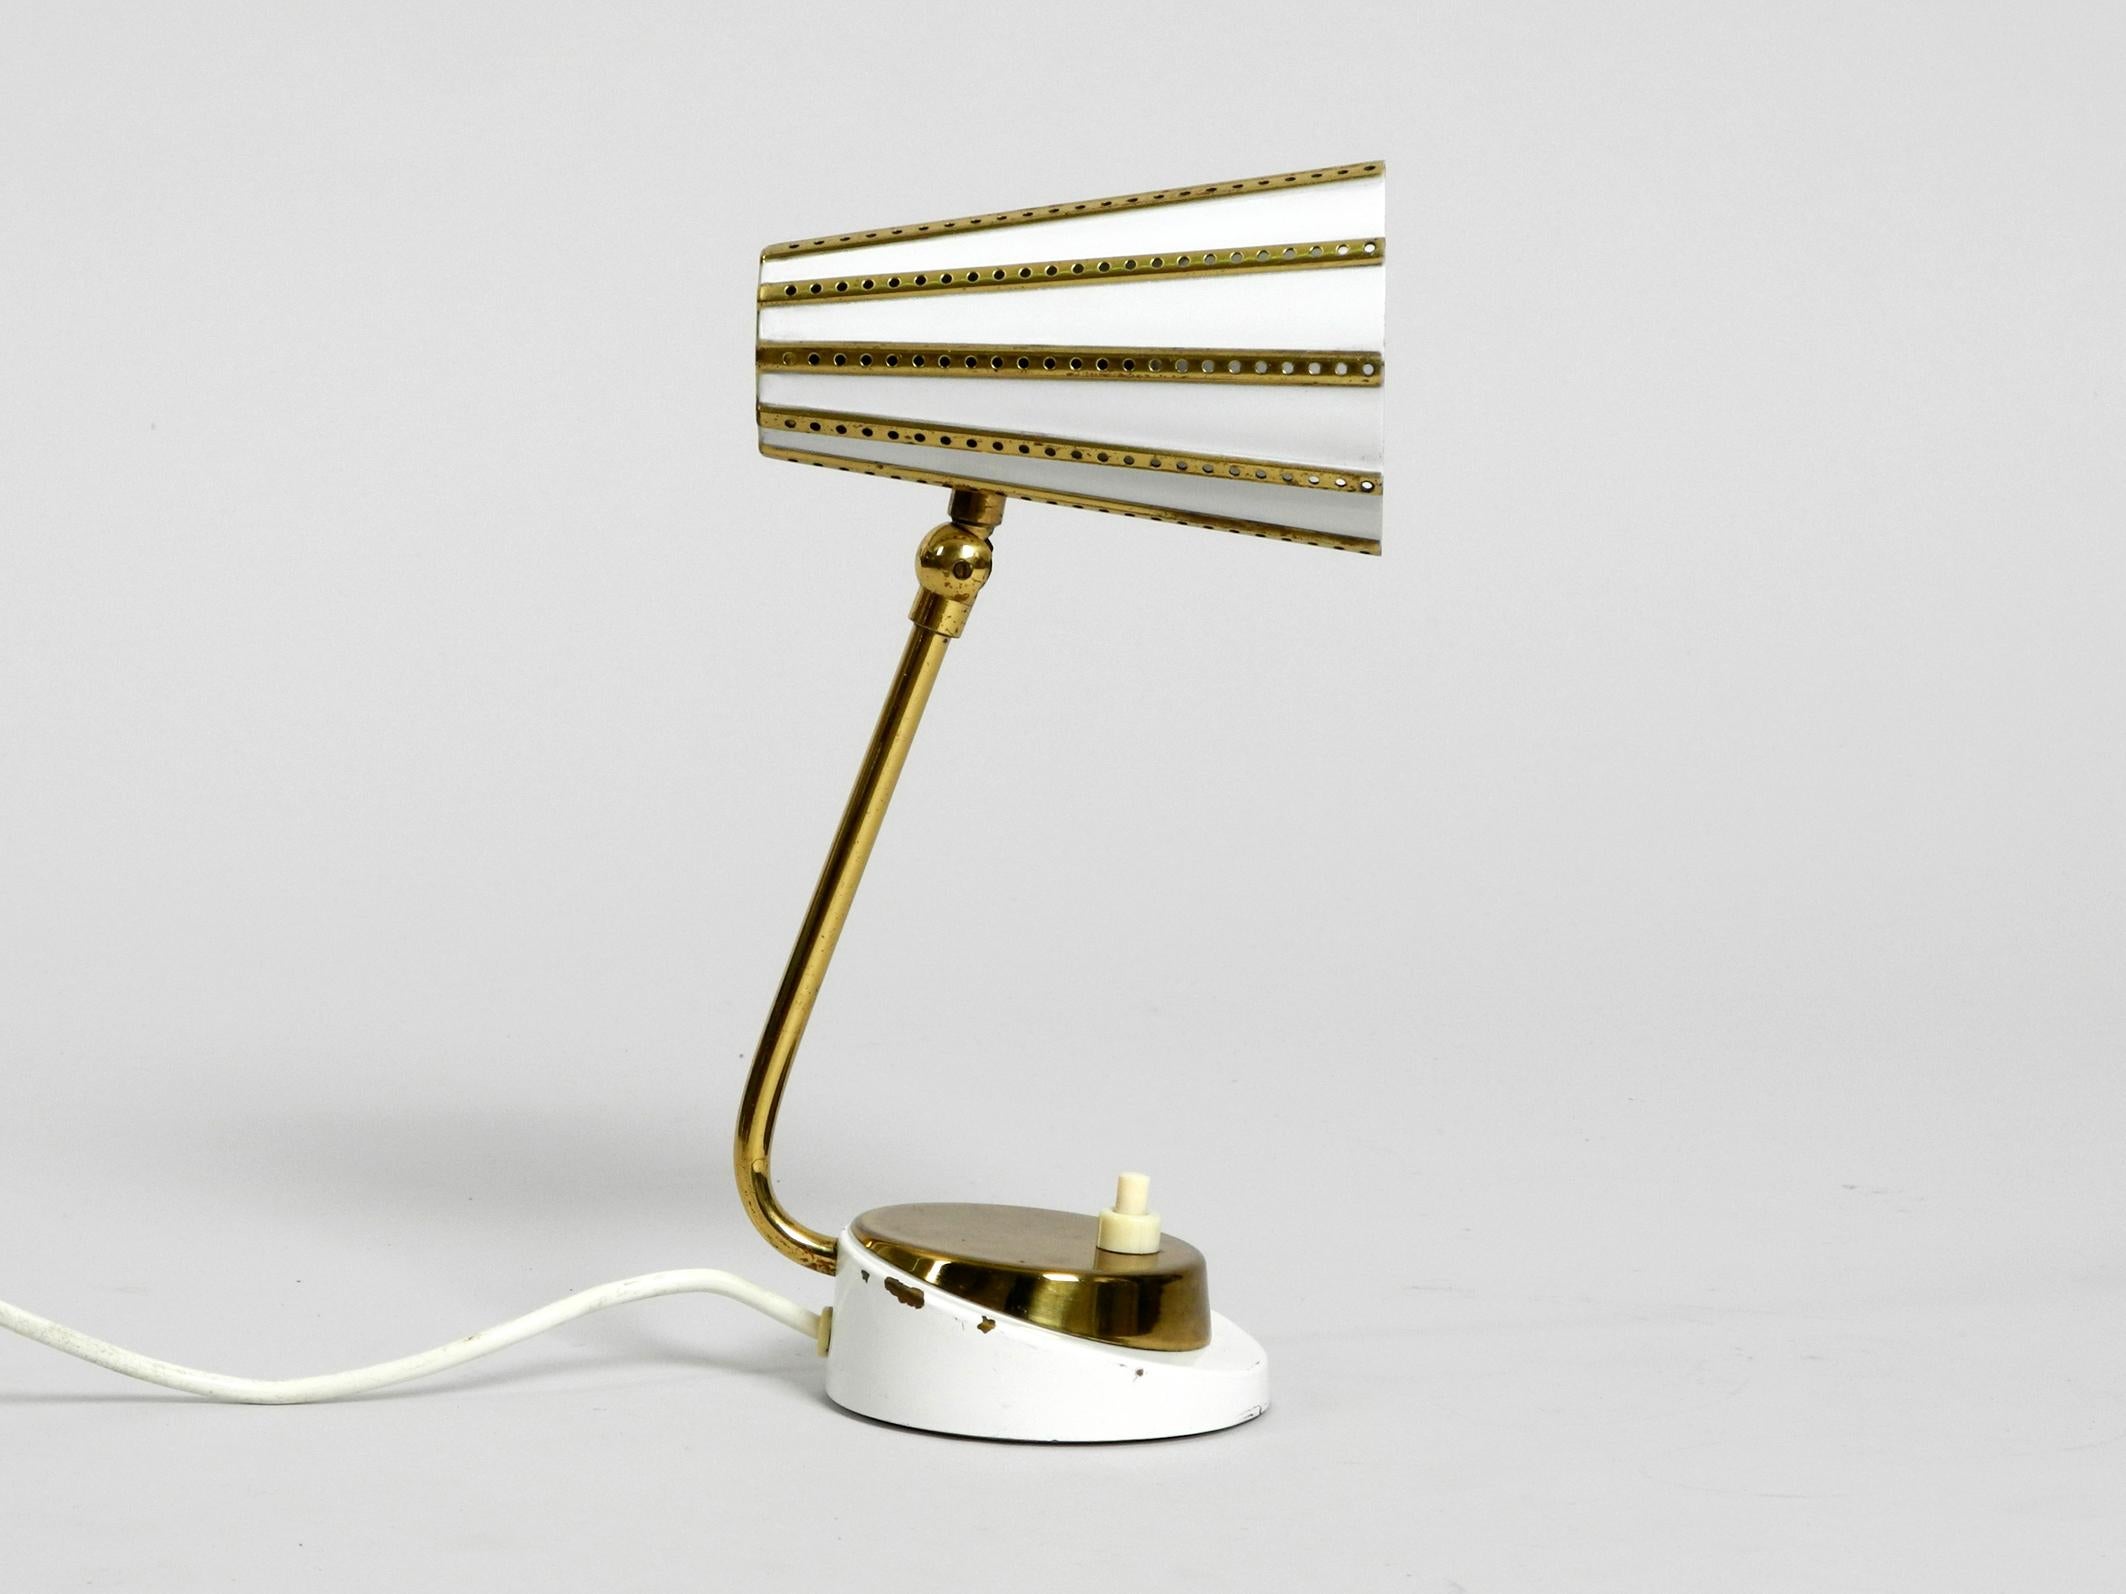 European Beautiful Midcentury Brass Table Bedside Lamp with Perforated Metal Shade